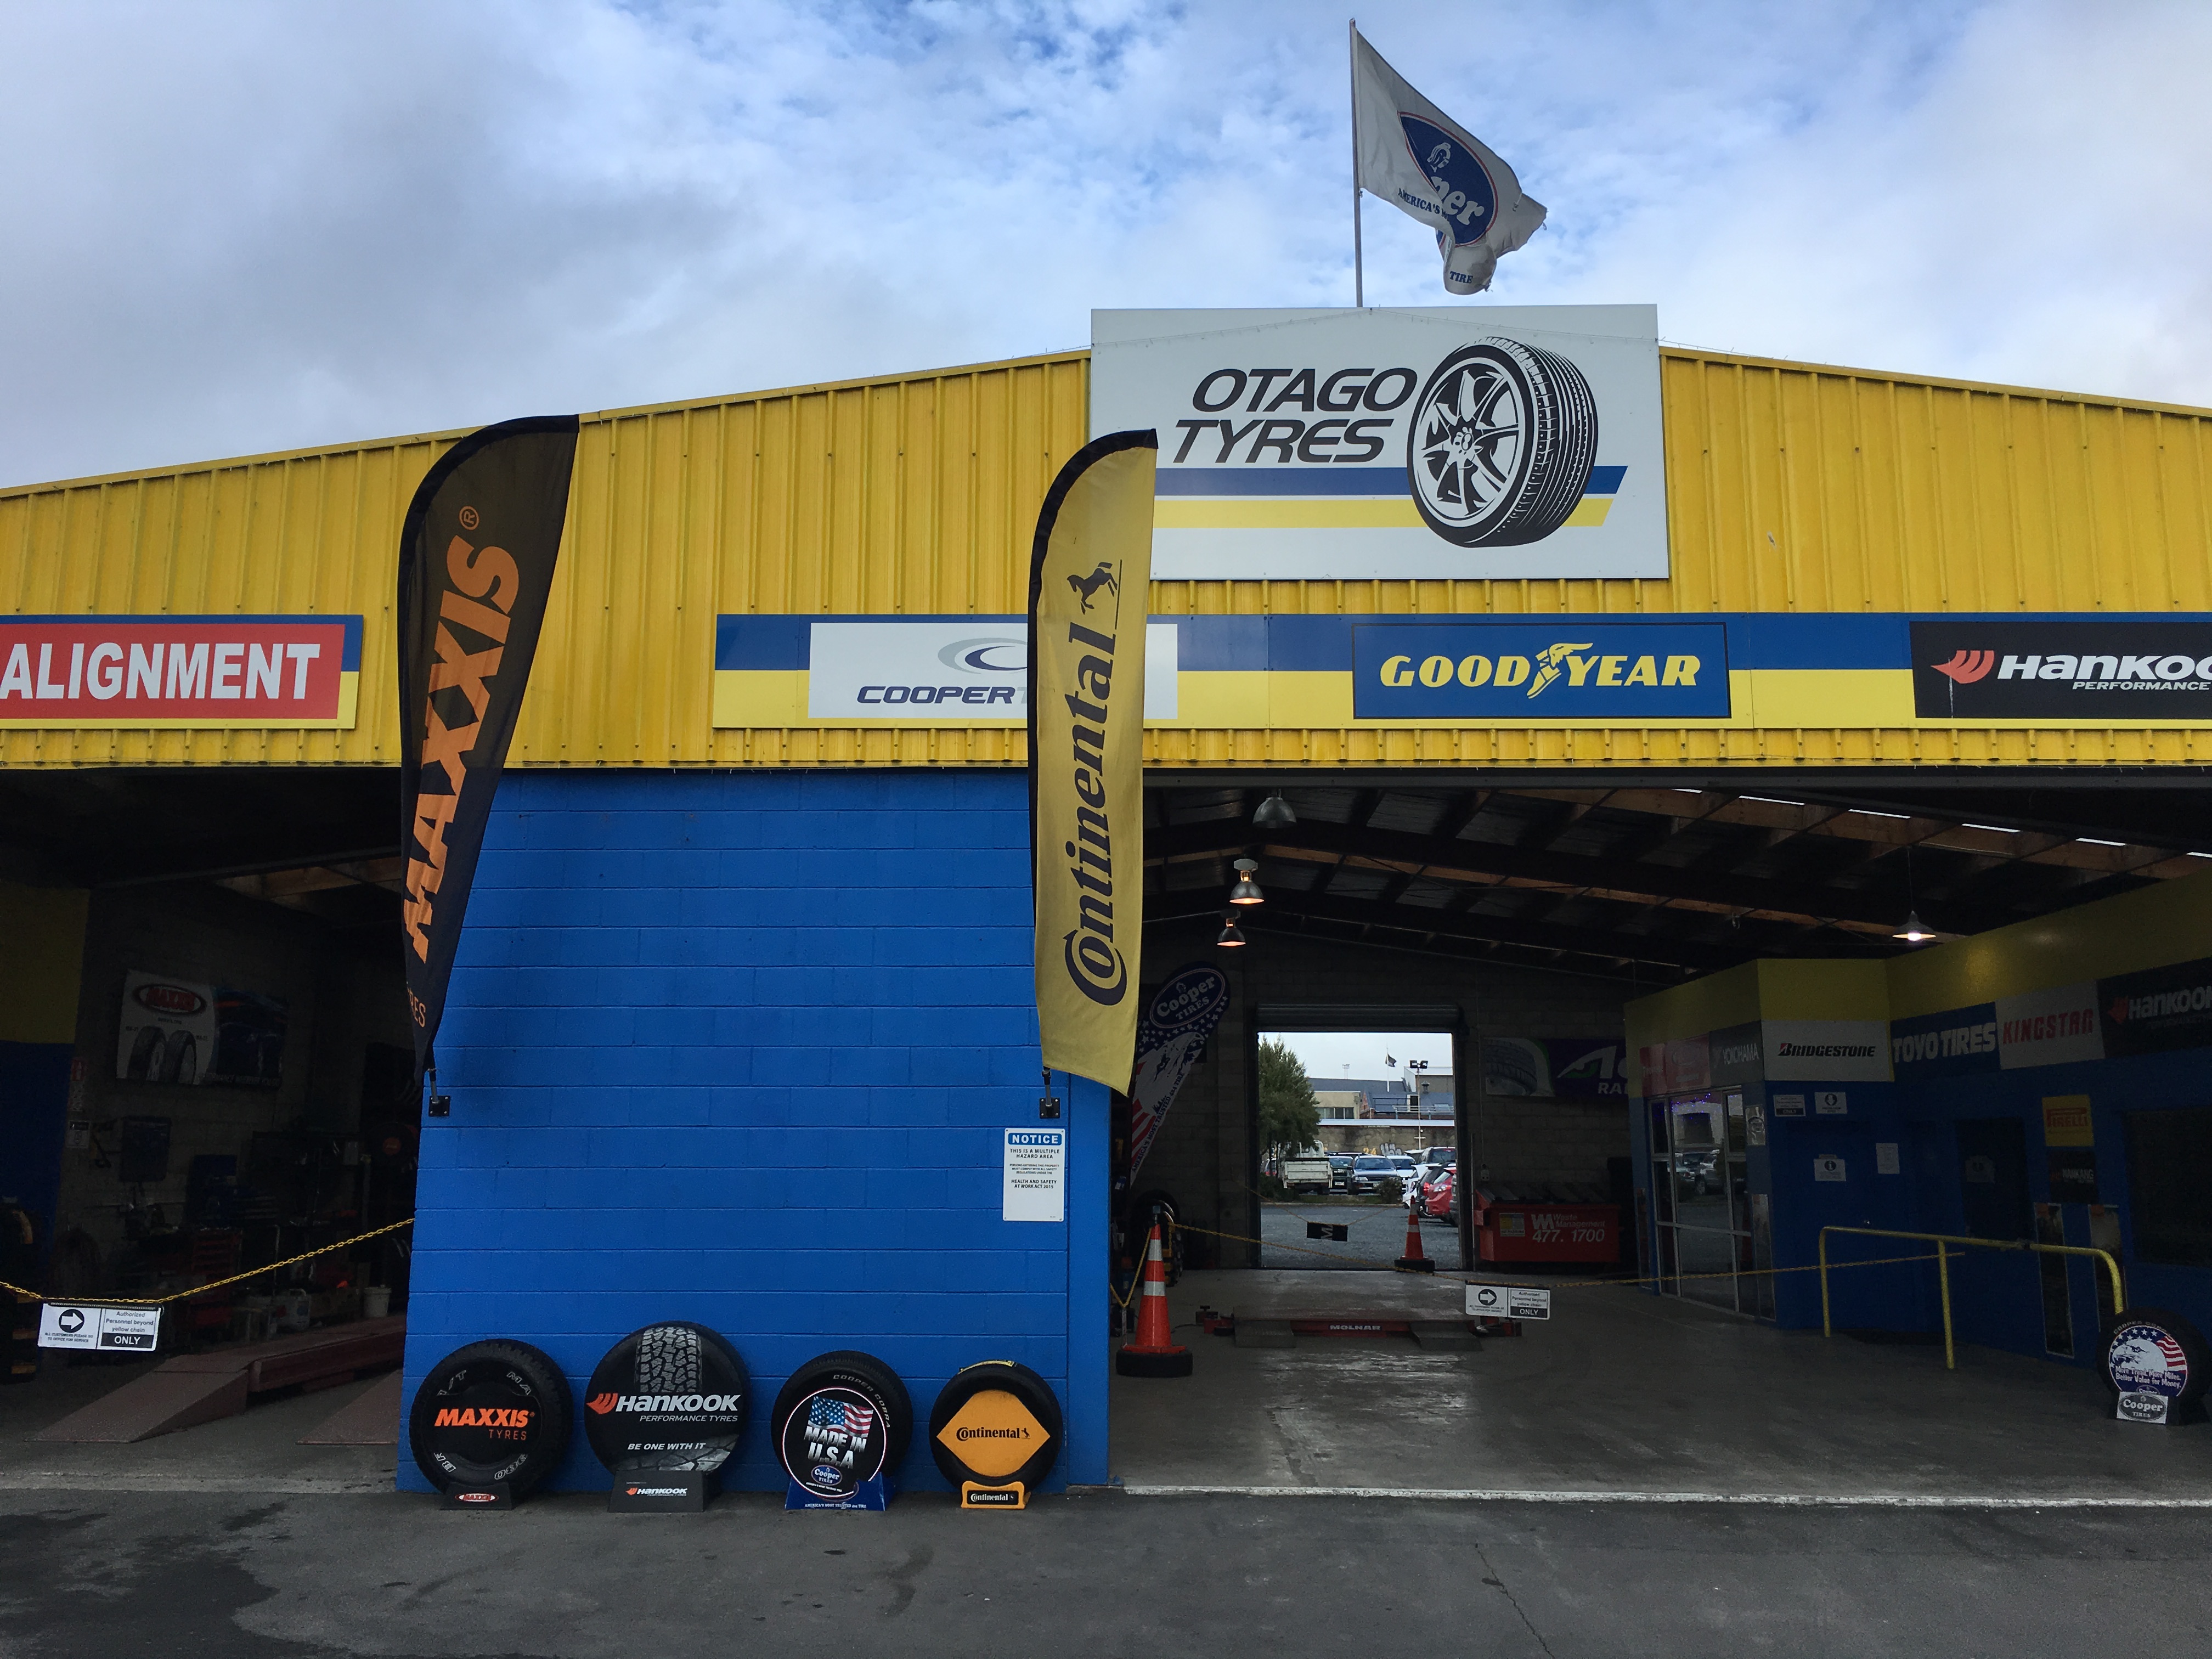 Otago Tyres has two handy locations, on St Andrew St (pictured) and on Hillside Rd.